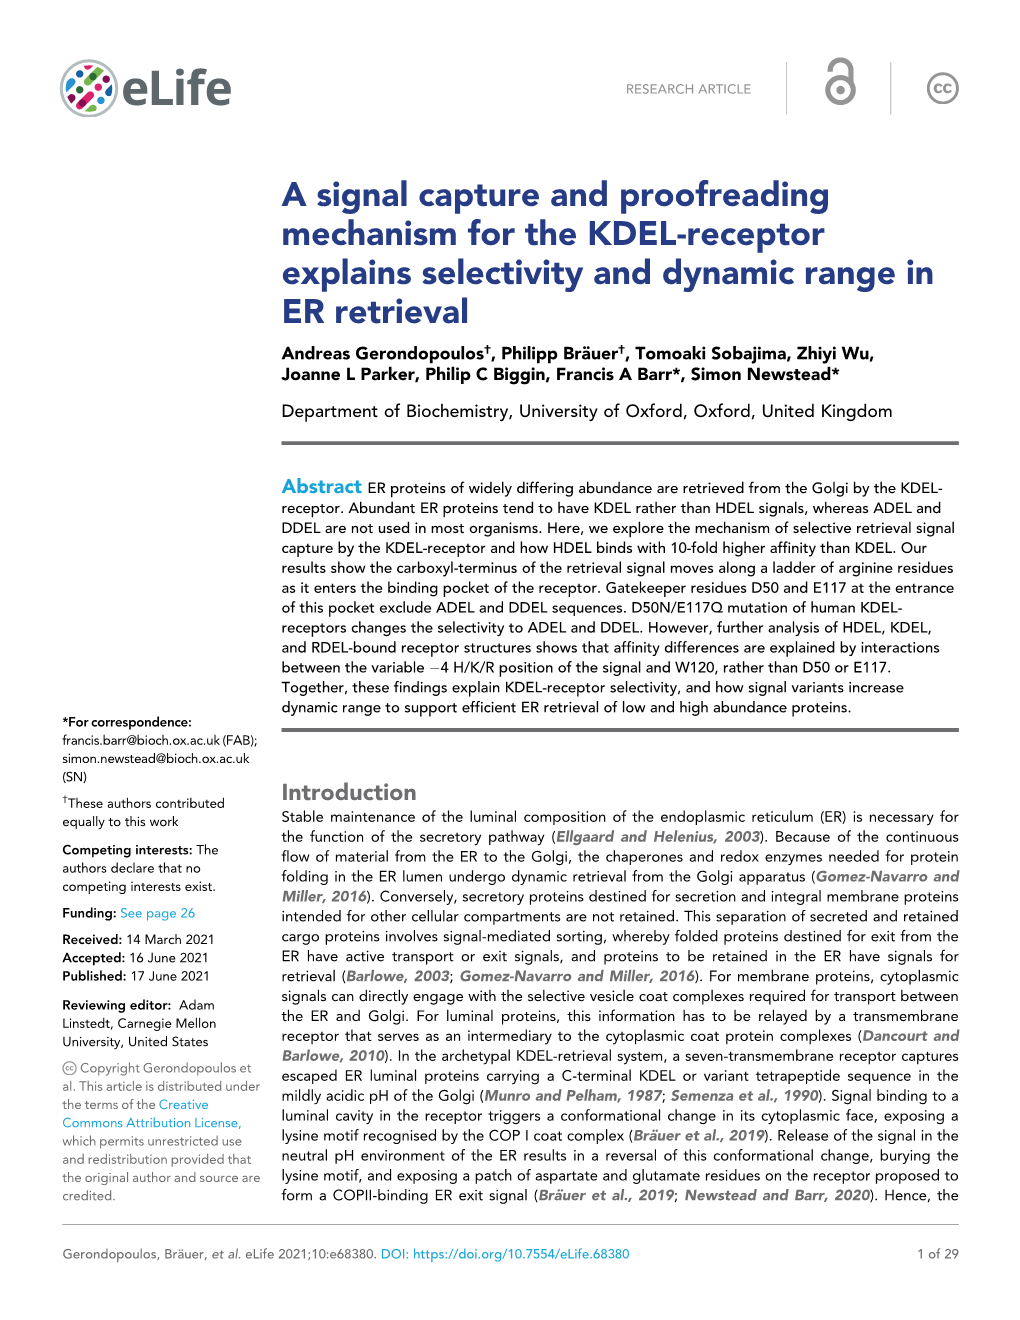 A Signal Capture and Proofreading Mechanism for the KDEL